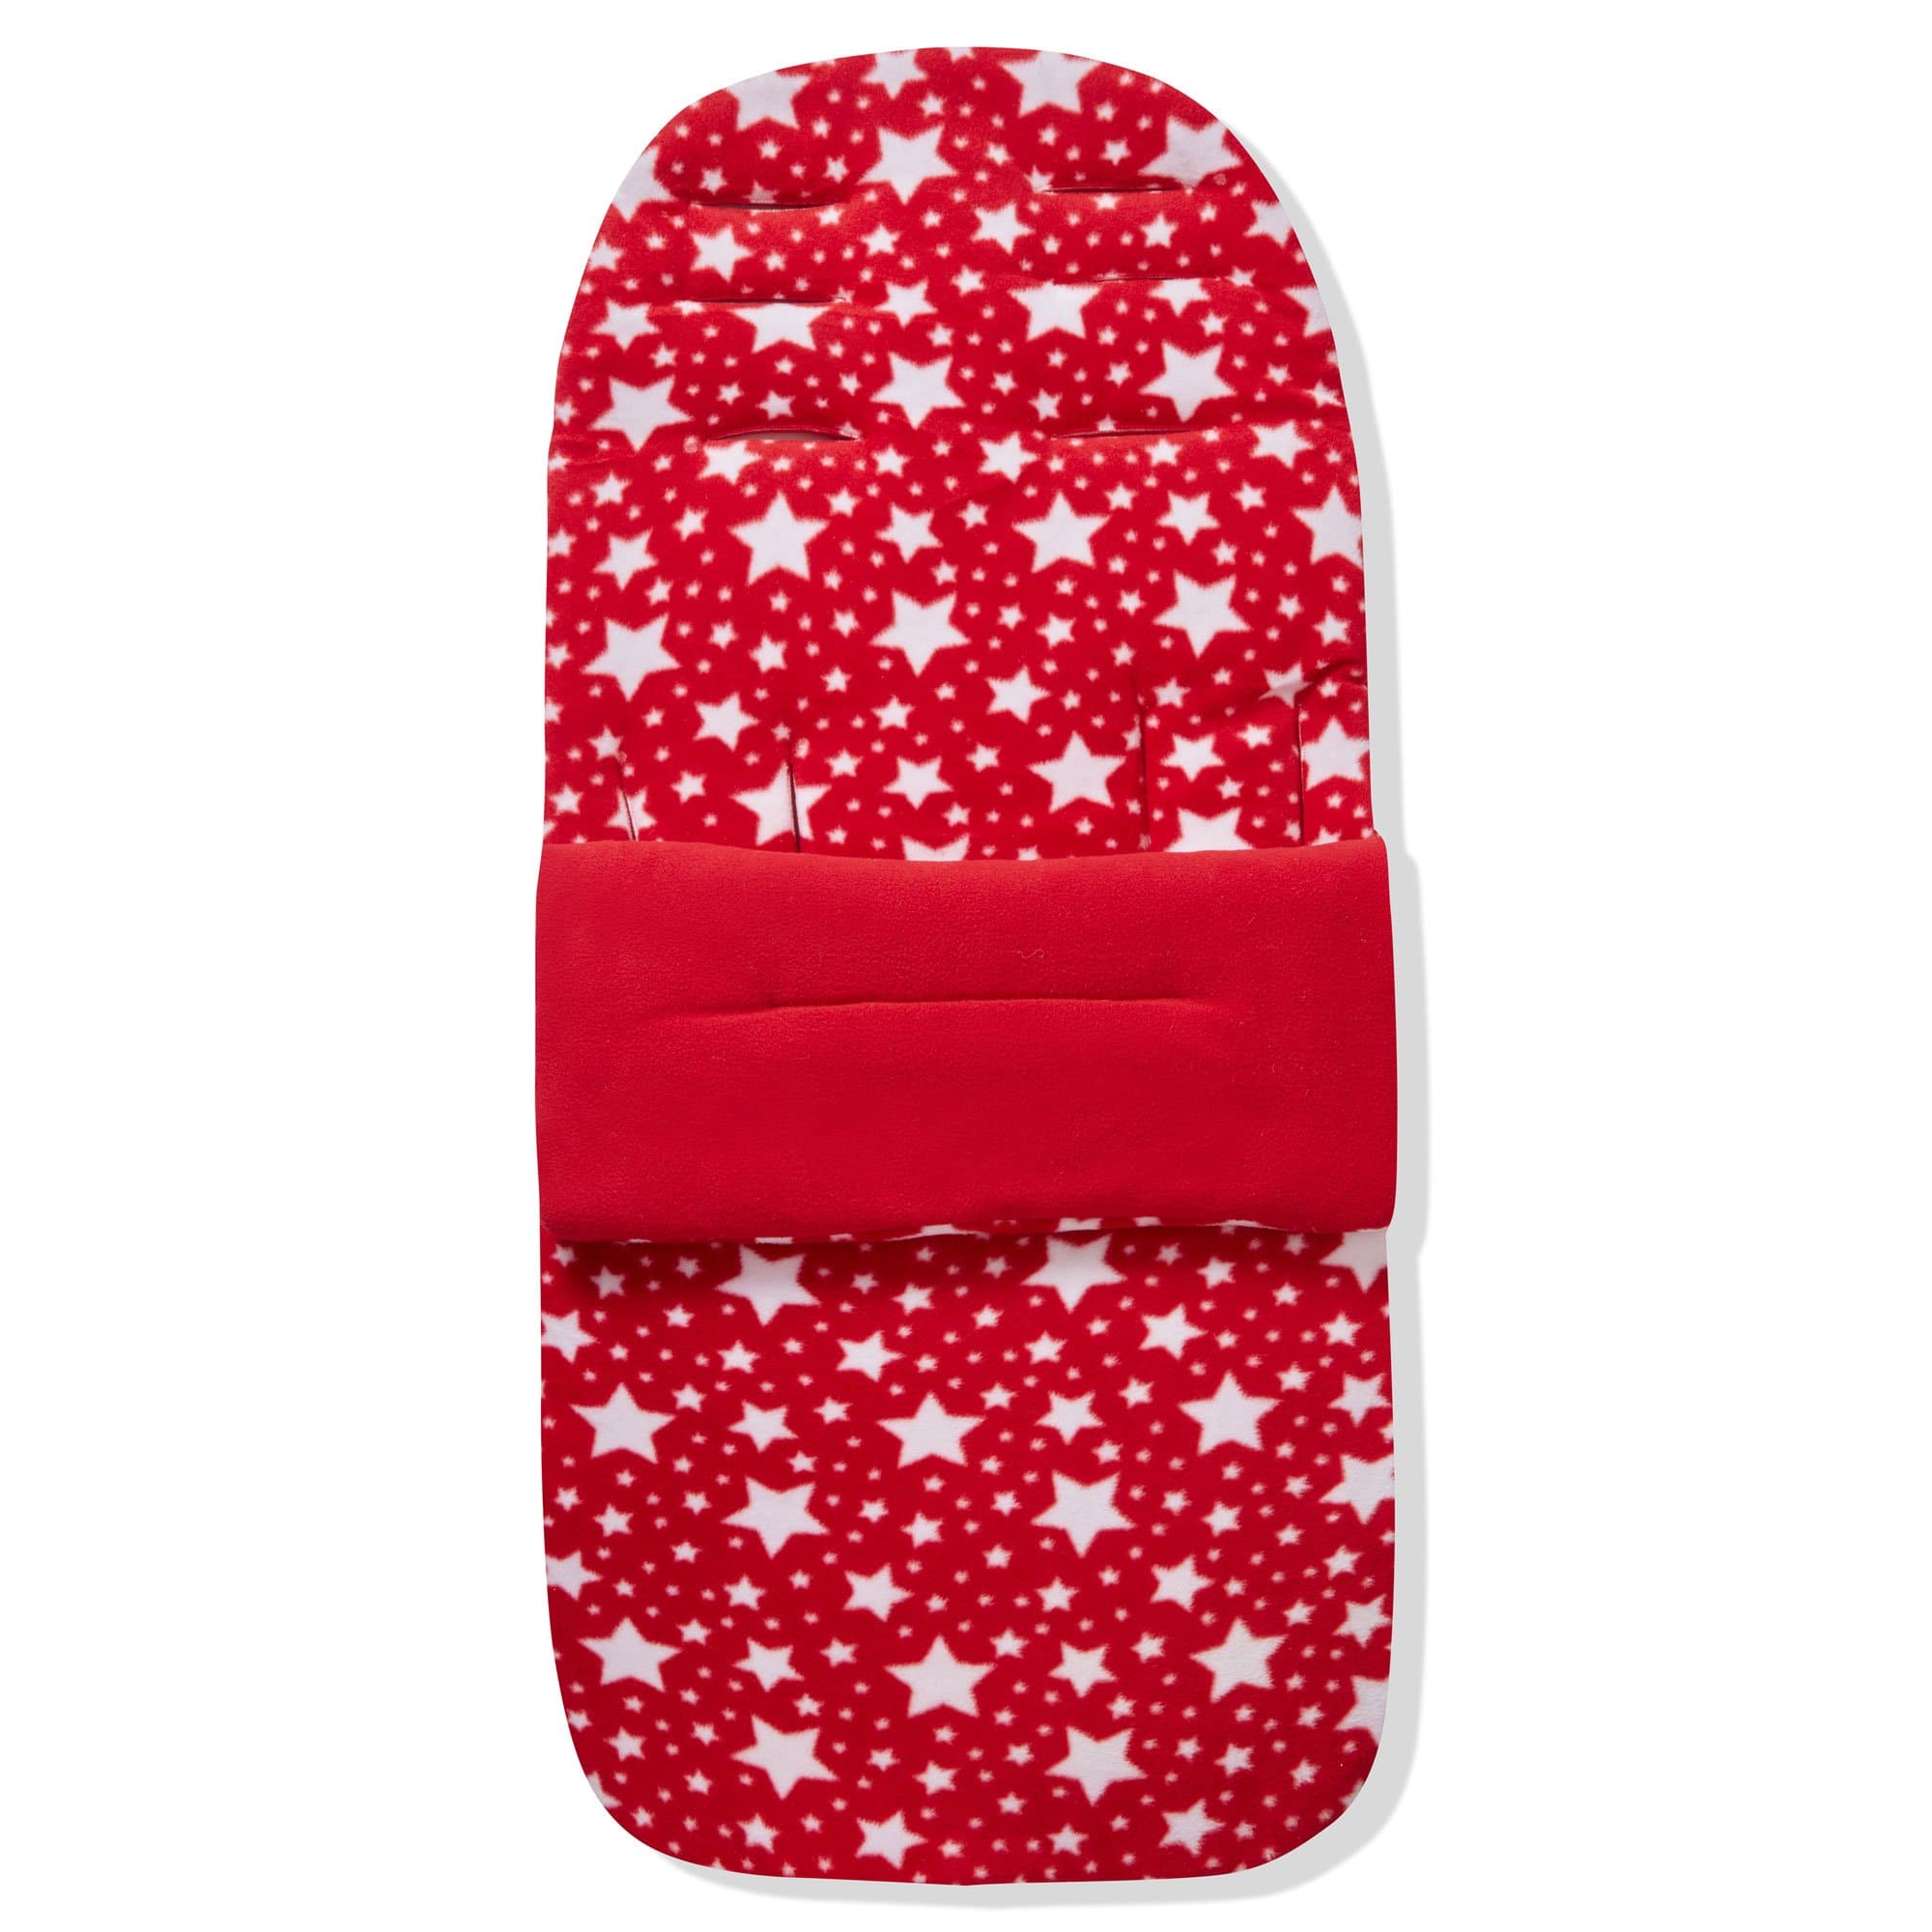 Fleece Footmuff / Cosy Toes Compatible With Bloom - Red Star / Fits All Models | For Your Little One